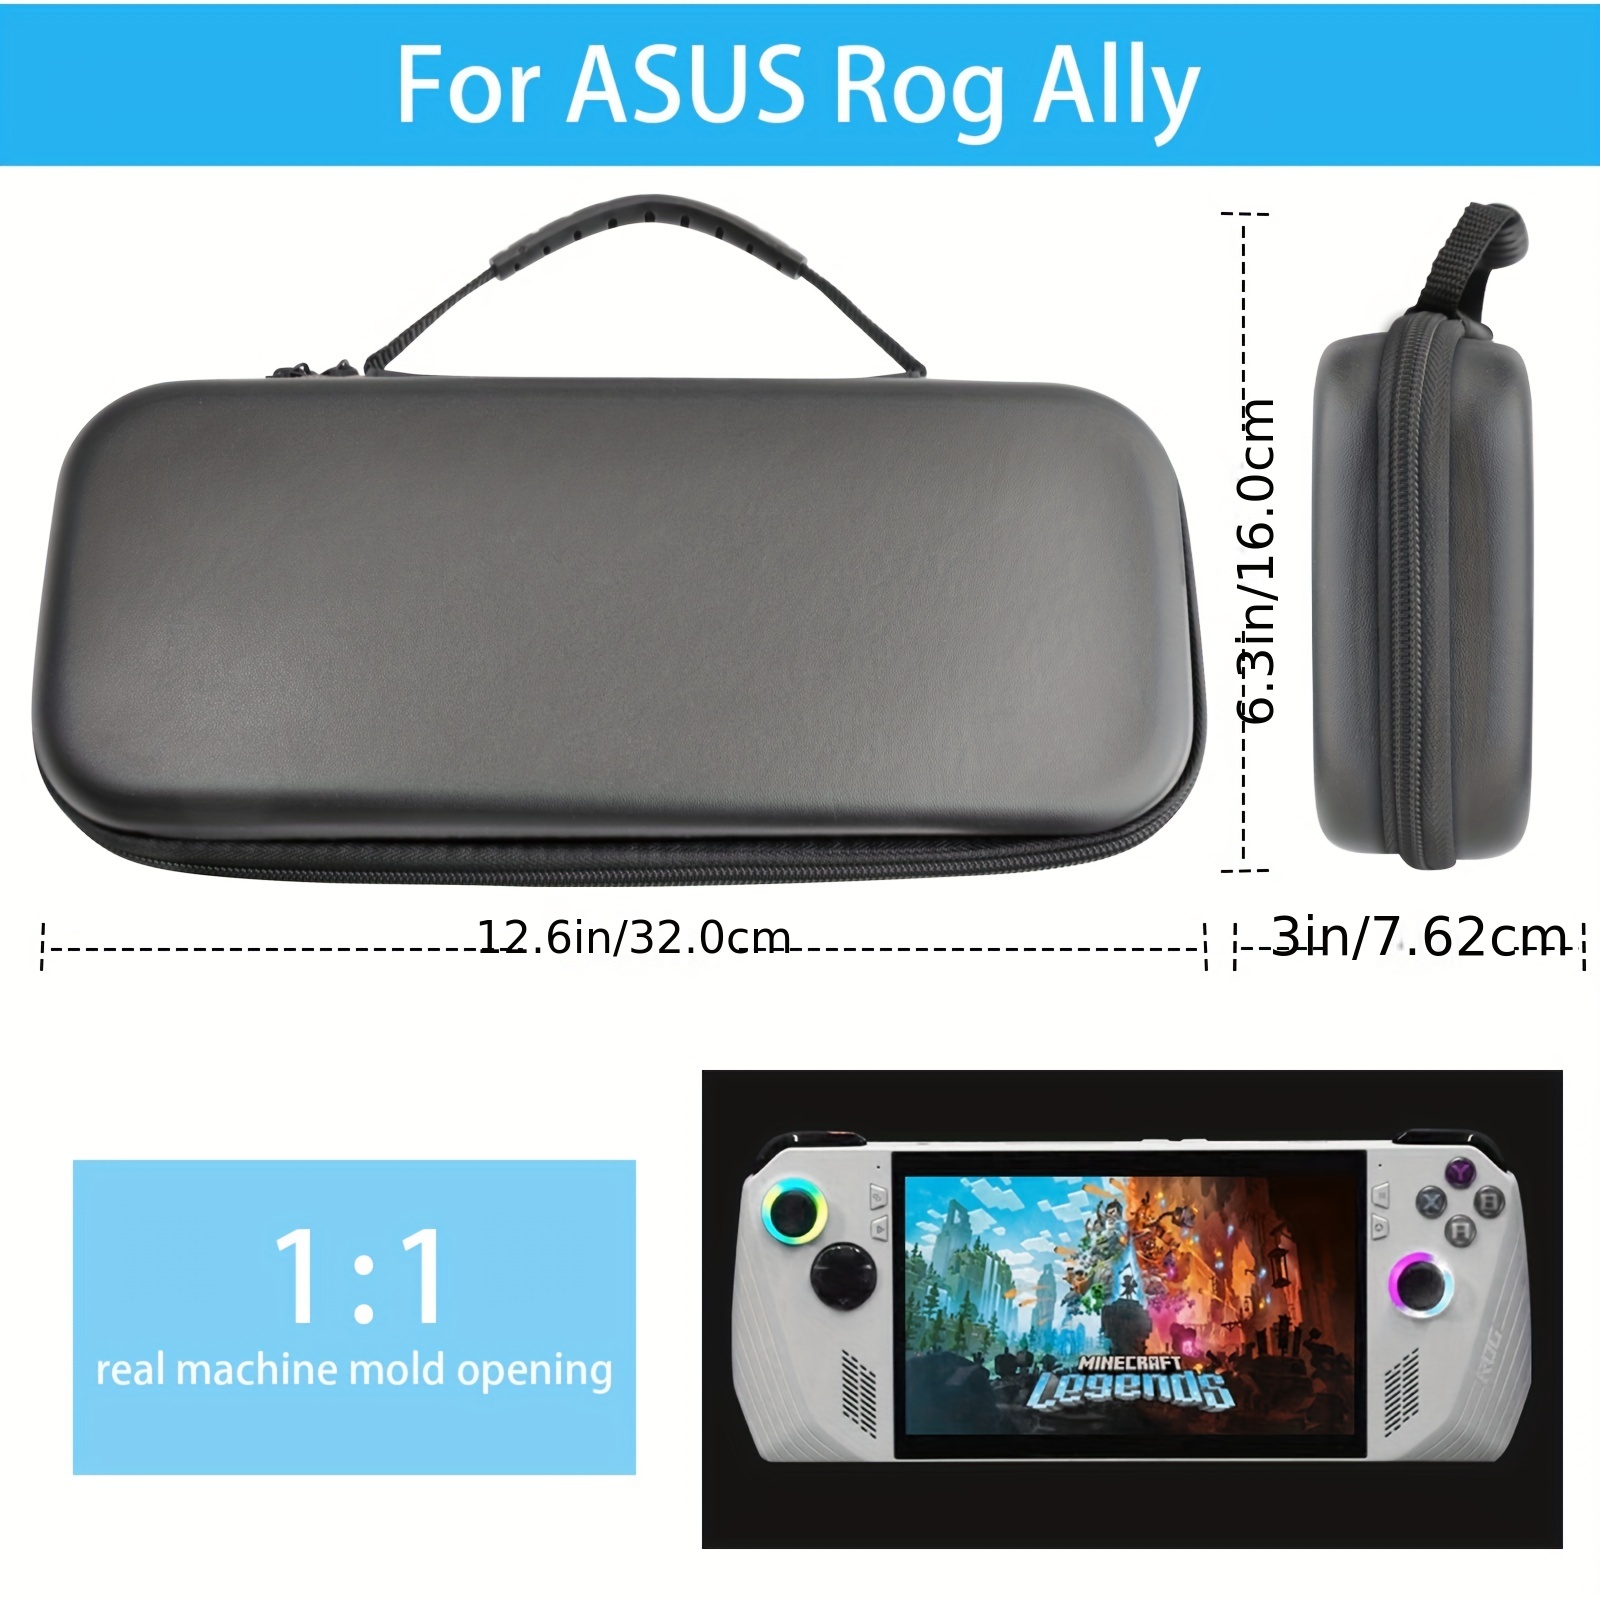 Miimall Compatible for ROG Ally Carrying Case, EVA Hard Travel-Friendly  Carrying Pouch Case with Portable Strap Storage Box Case for Asus ROG Ally